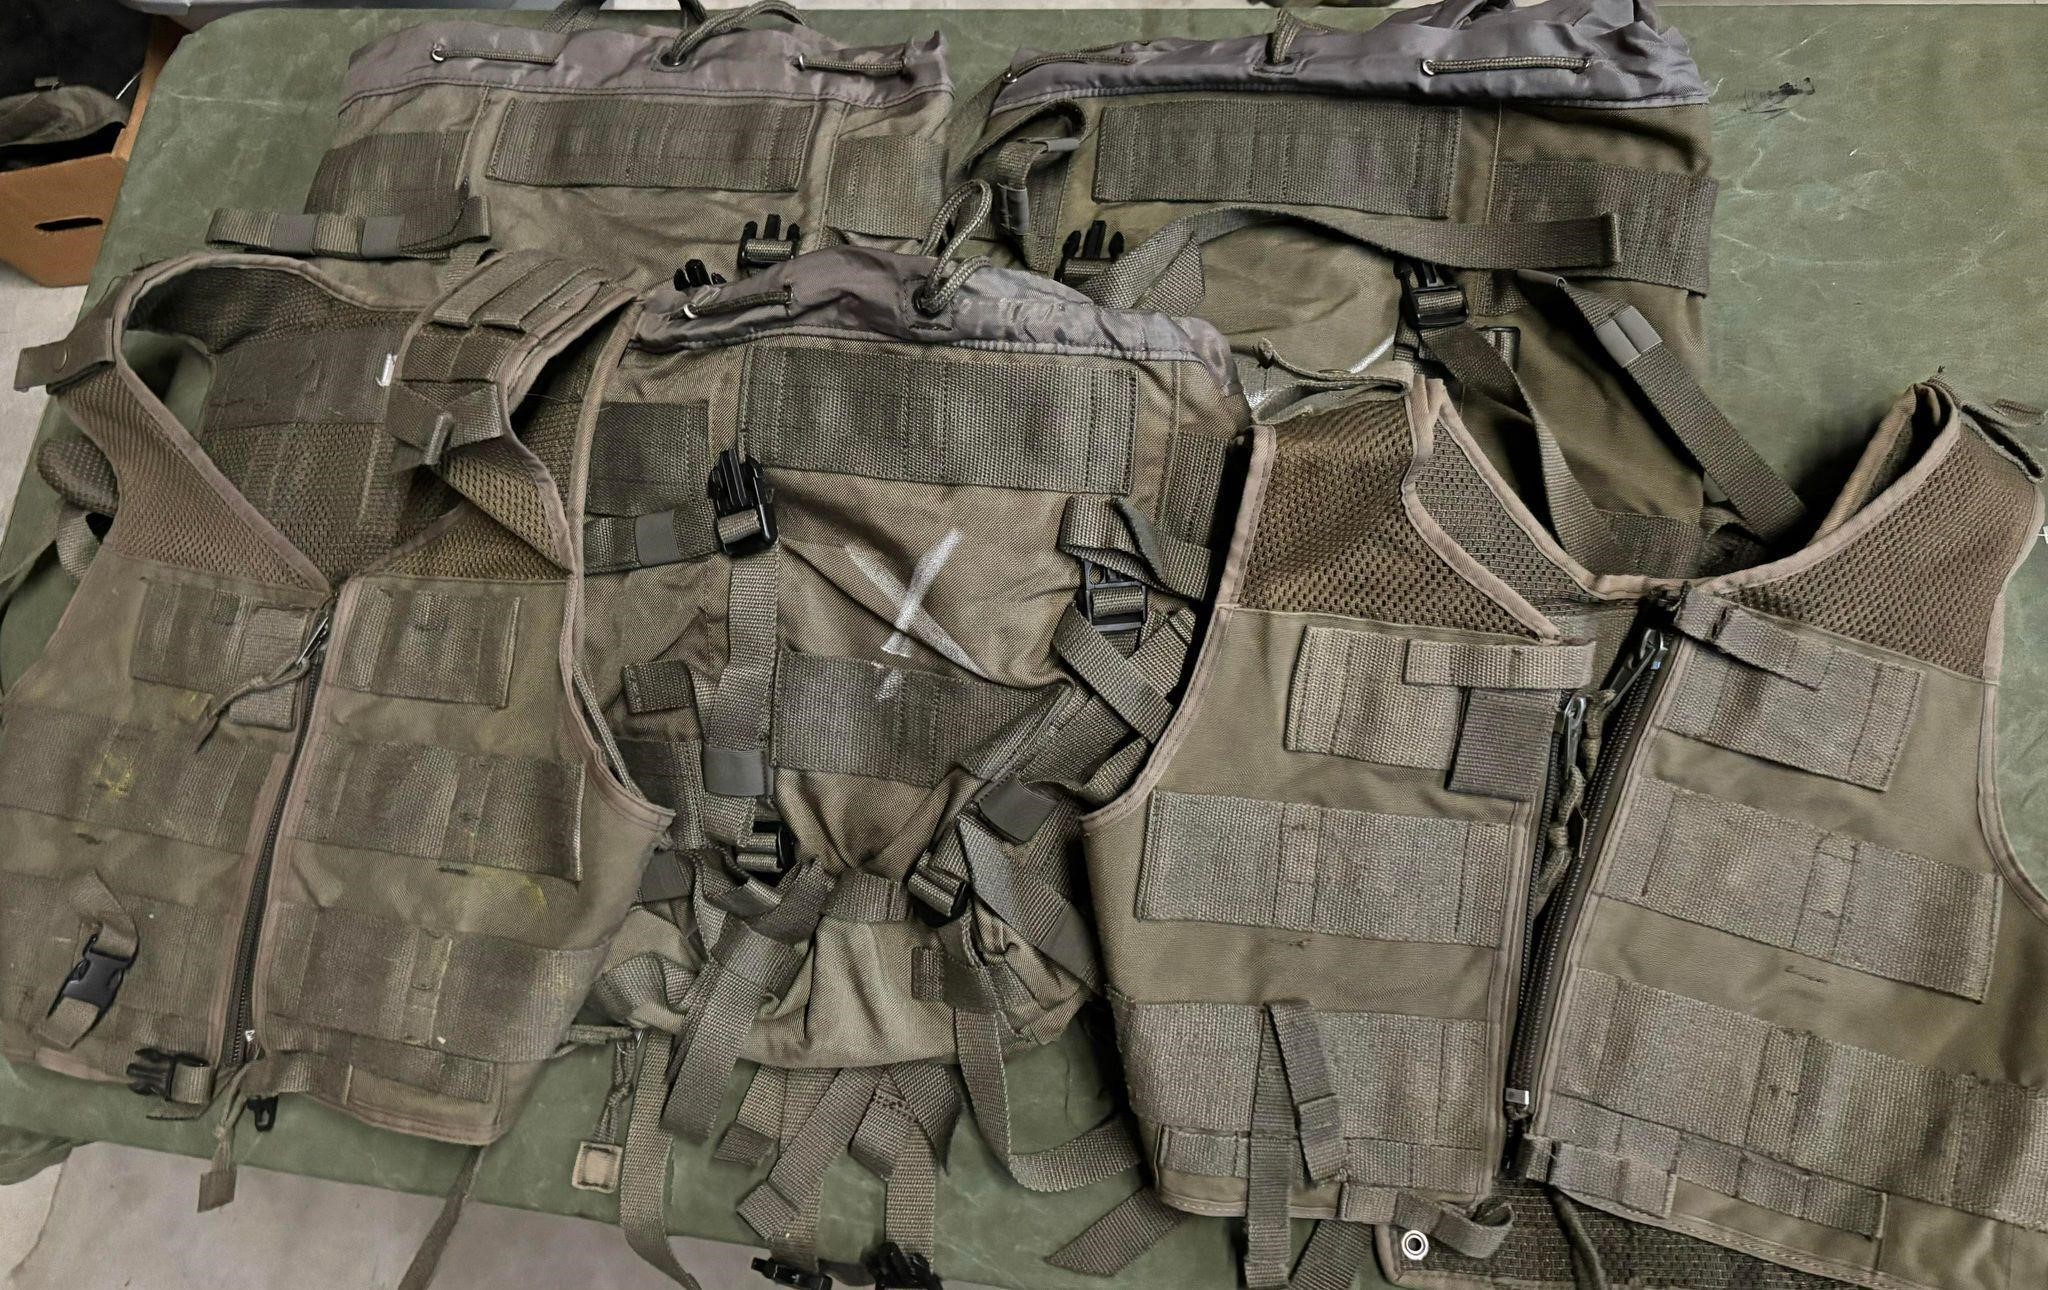 Austrian military gear vest and bags